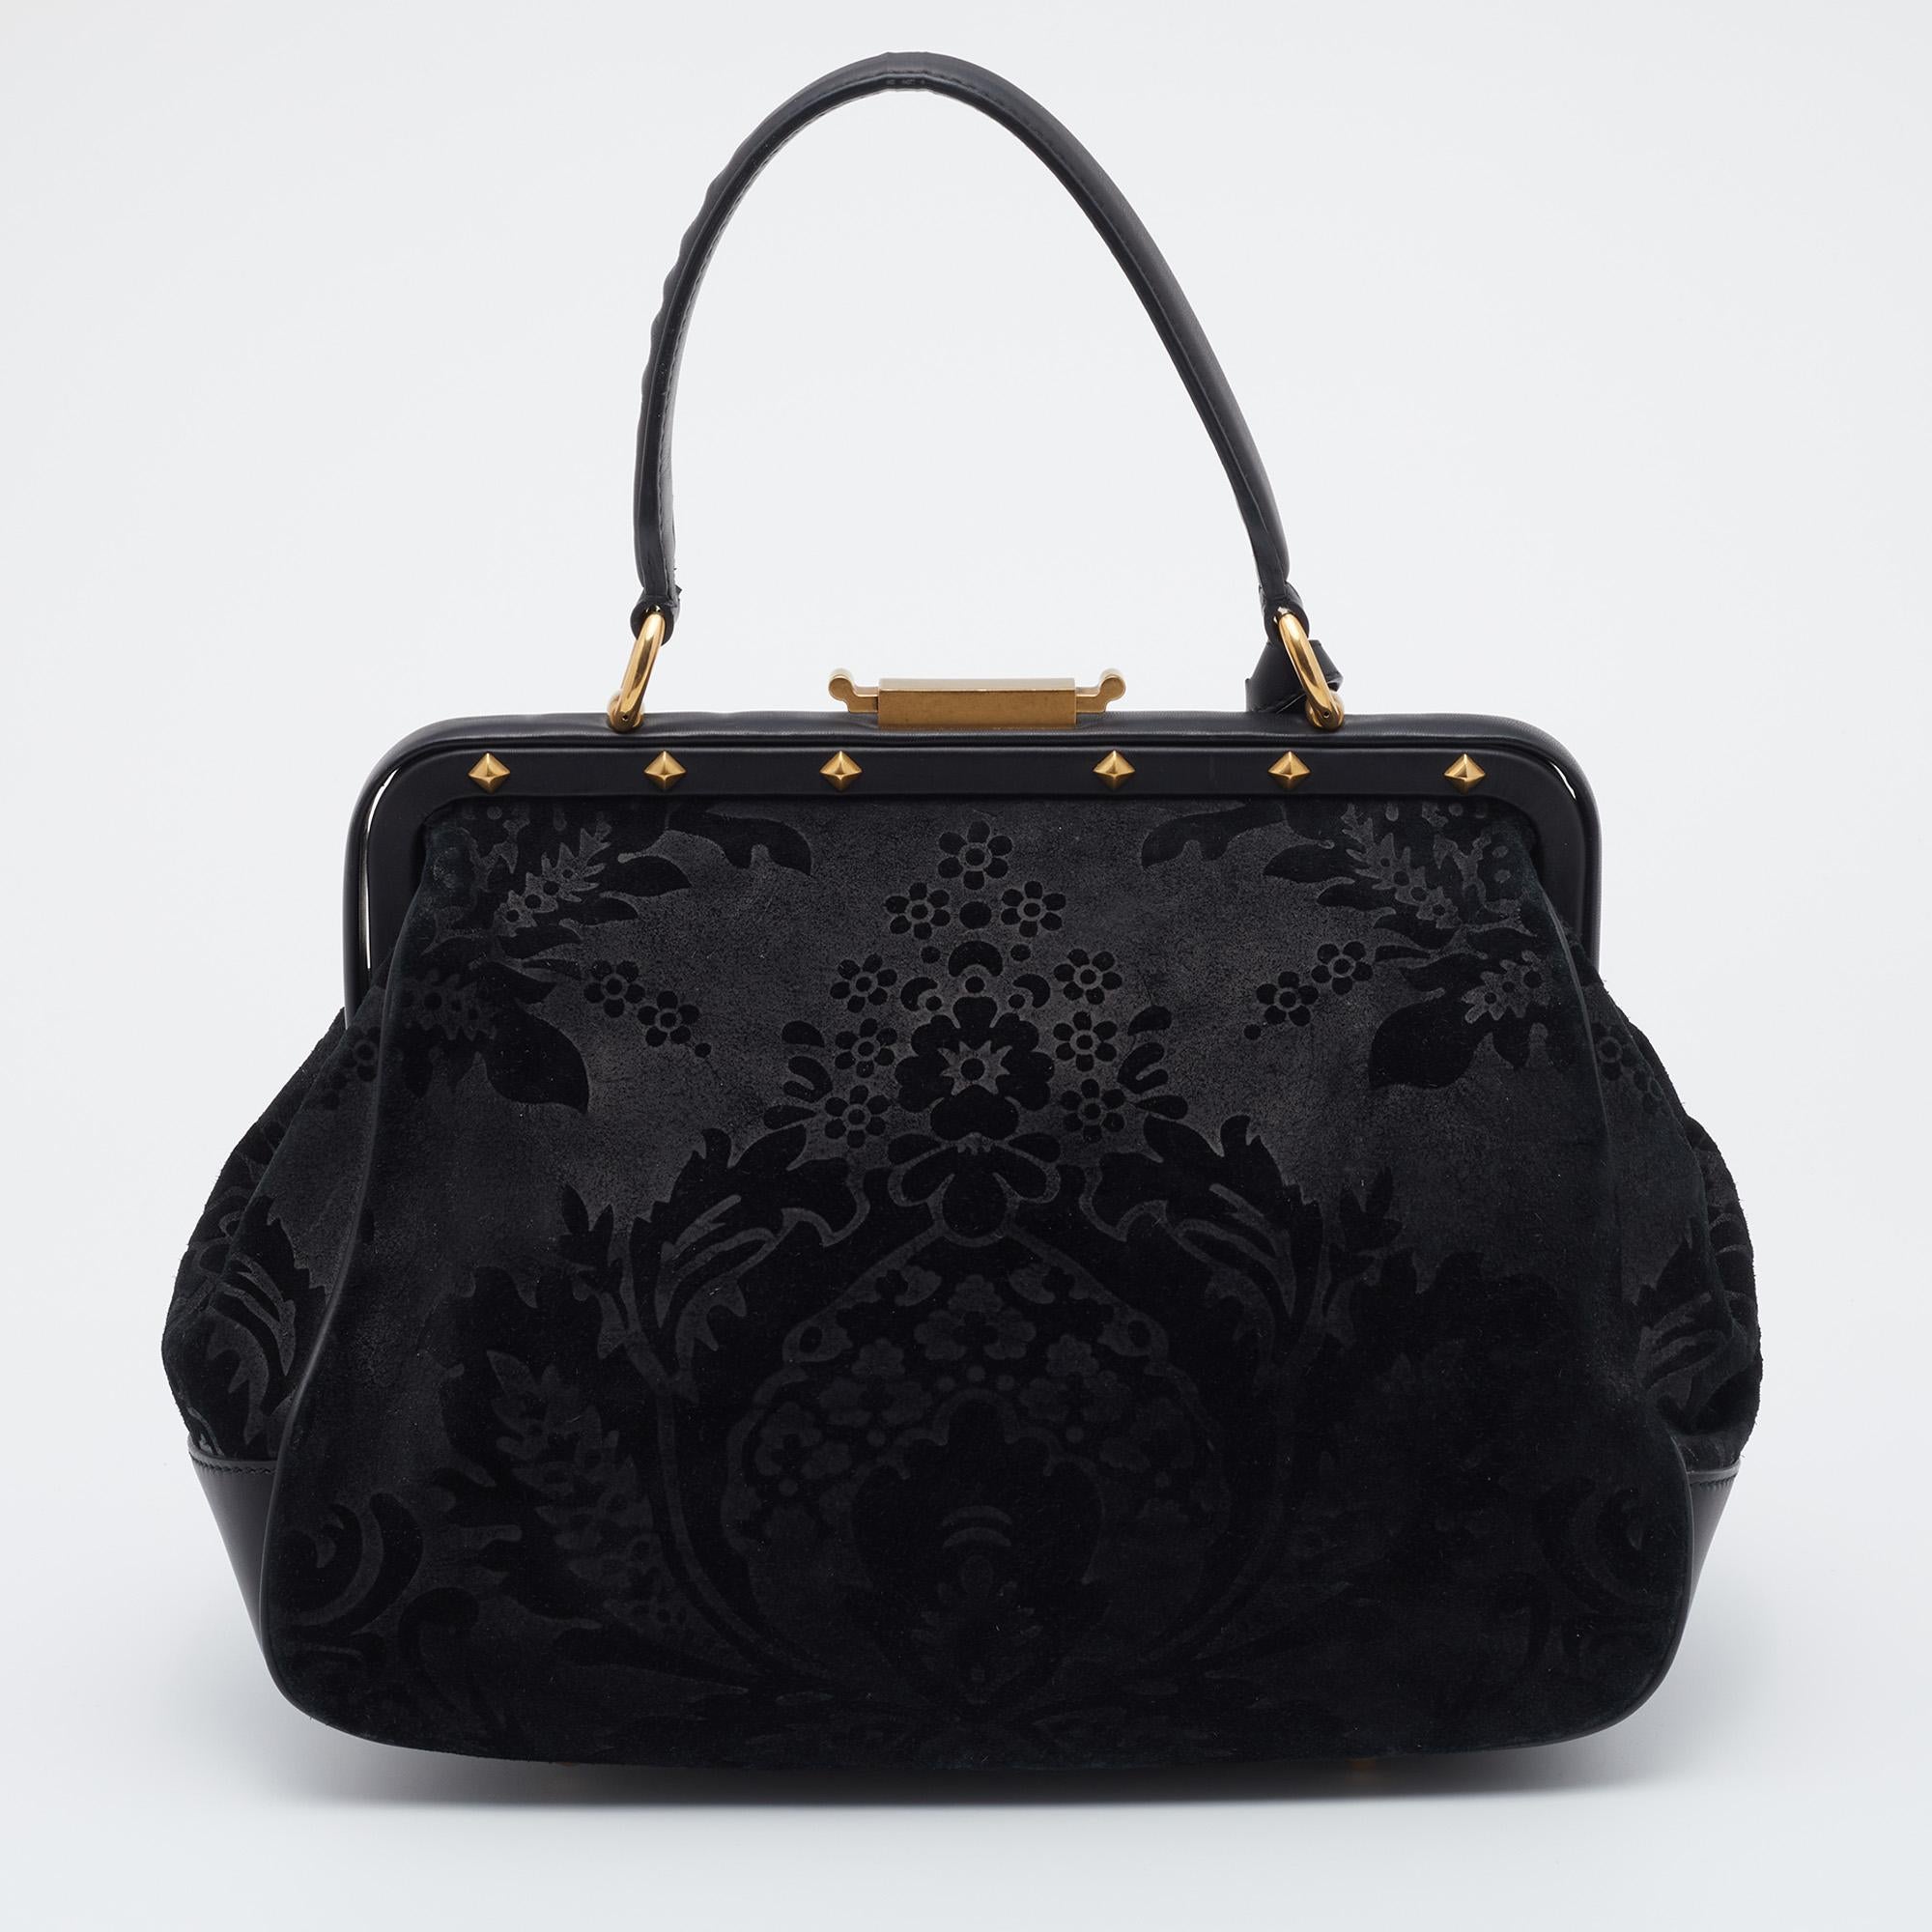 This Gucci bag shows the brand's regard for innovative and functional design. Created from leather and suede, it is admirable with its gold-tone accents and embodies a structural shape. Lined with fabric, it will lend your valuables a stylish and